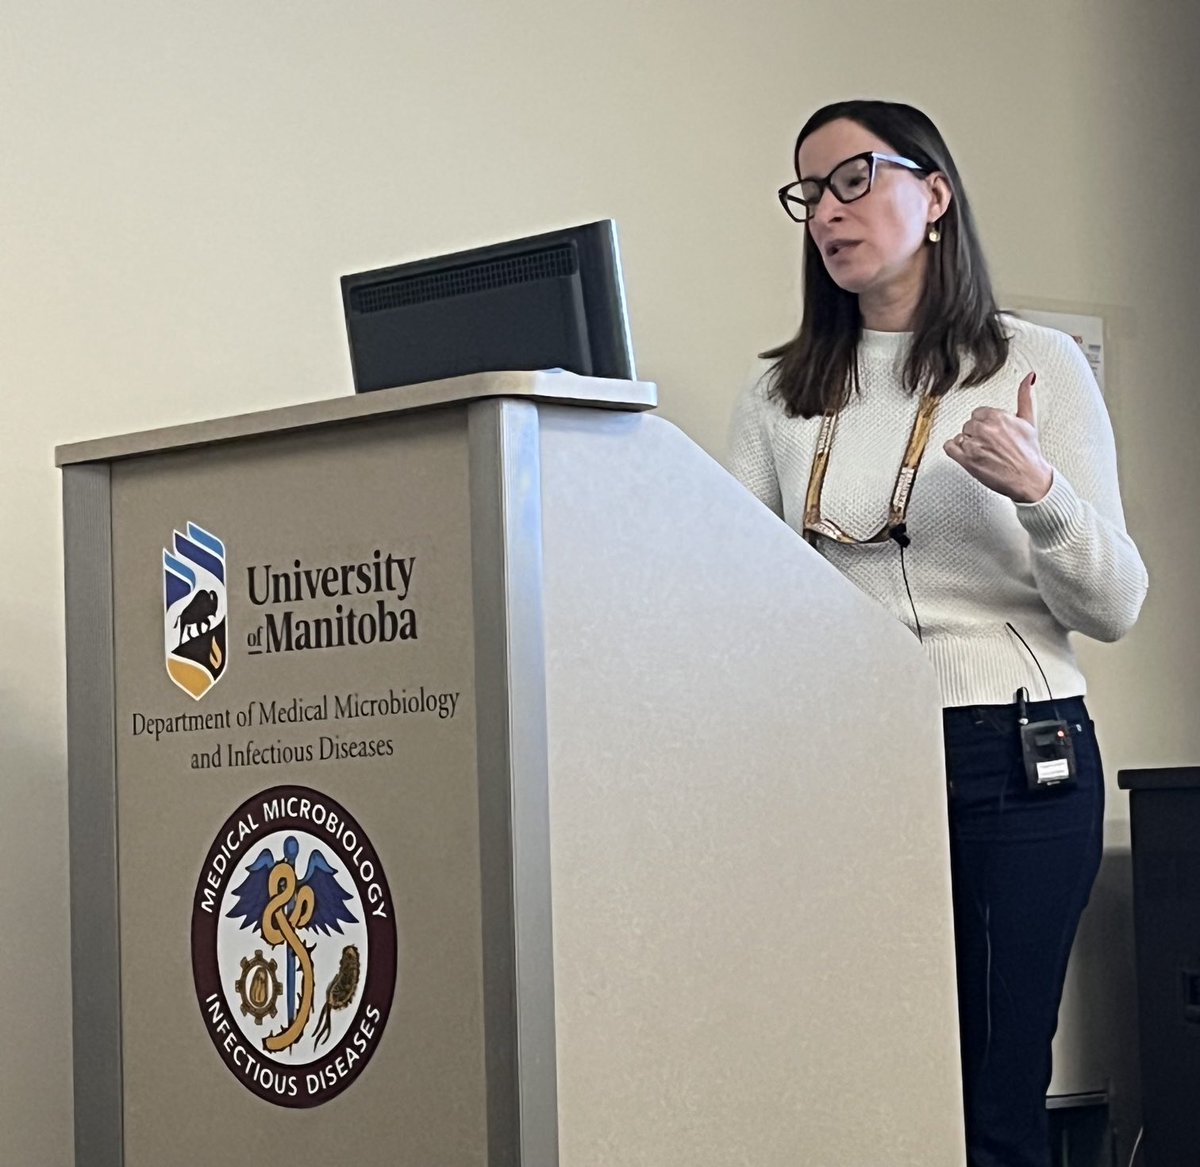 MMID’s own Dr Barbara Porto presents her work on repurposing of a drug to fight Respiratory Syncytial Virus (RSV) infection which is a deadly respiratory infection.